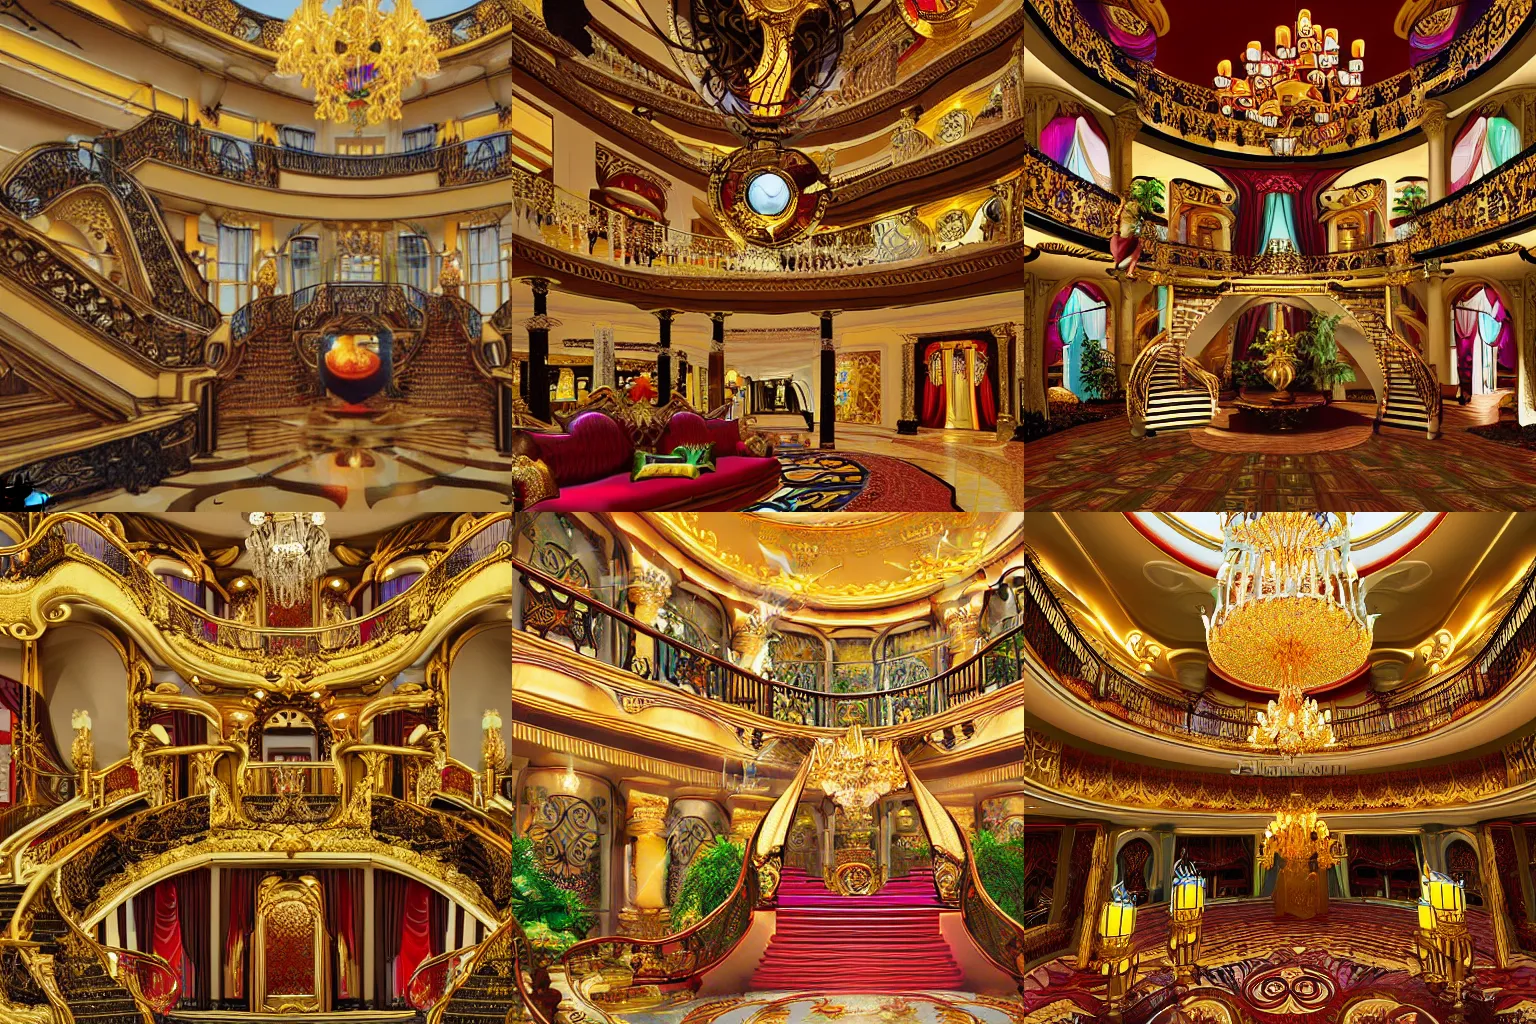 Prompt: large luxurious billionaire's atrium. Maximalist colorful decoration and fancy furniture. Classic architecture with golden accents. Curved staircase with elaborate railing. Large ornate fireplace. Illumination provided by fire torches, chandeliers, and candles. Detailed digital art by studio ghibli